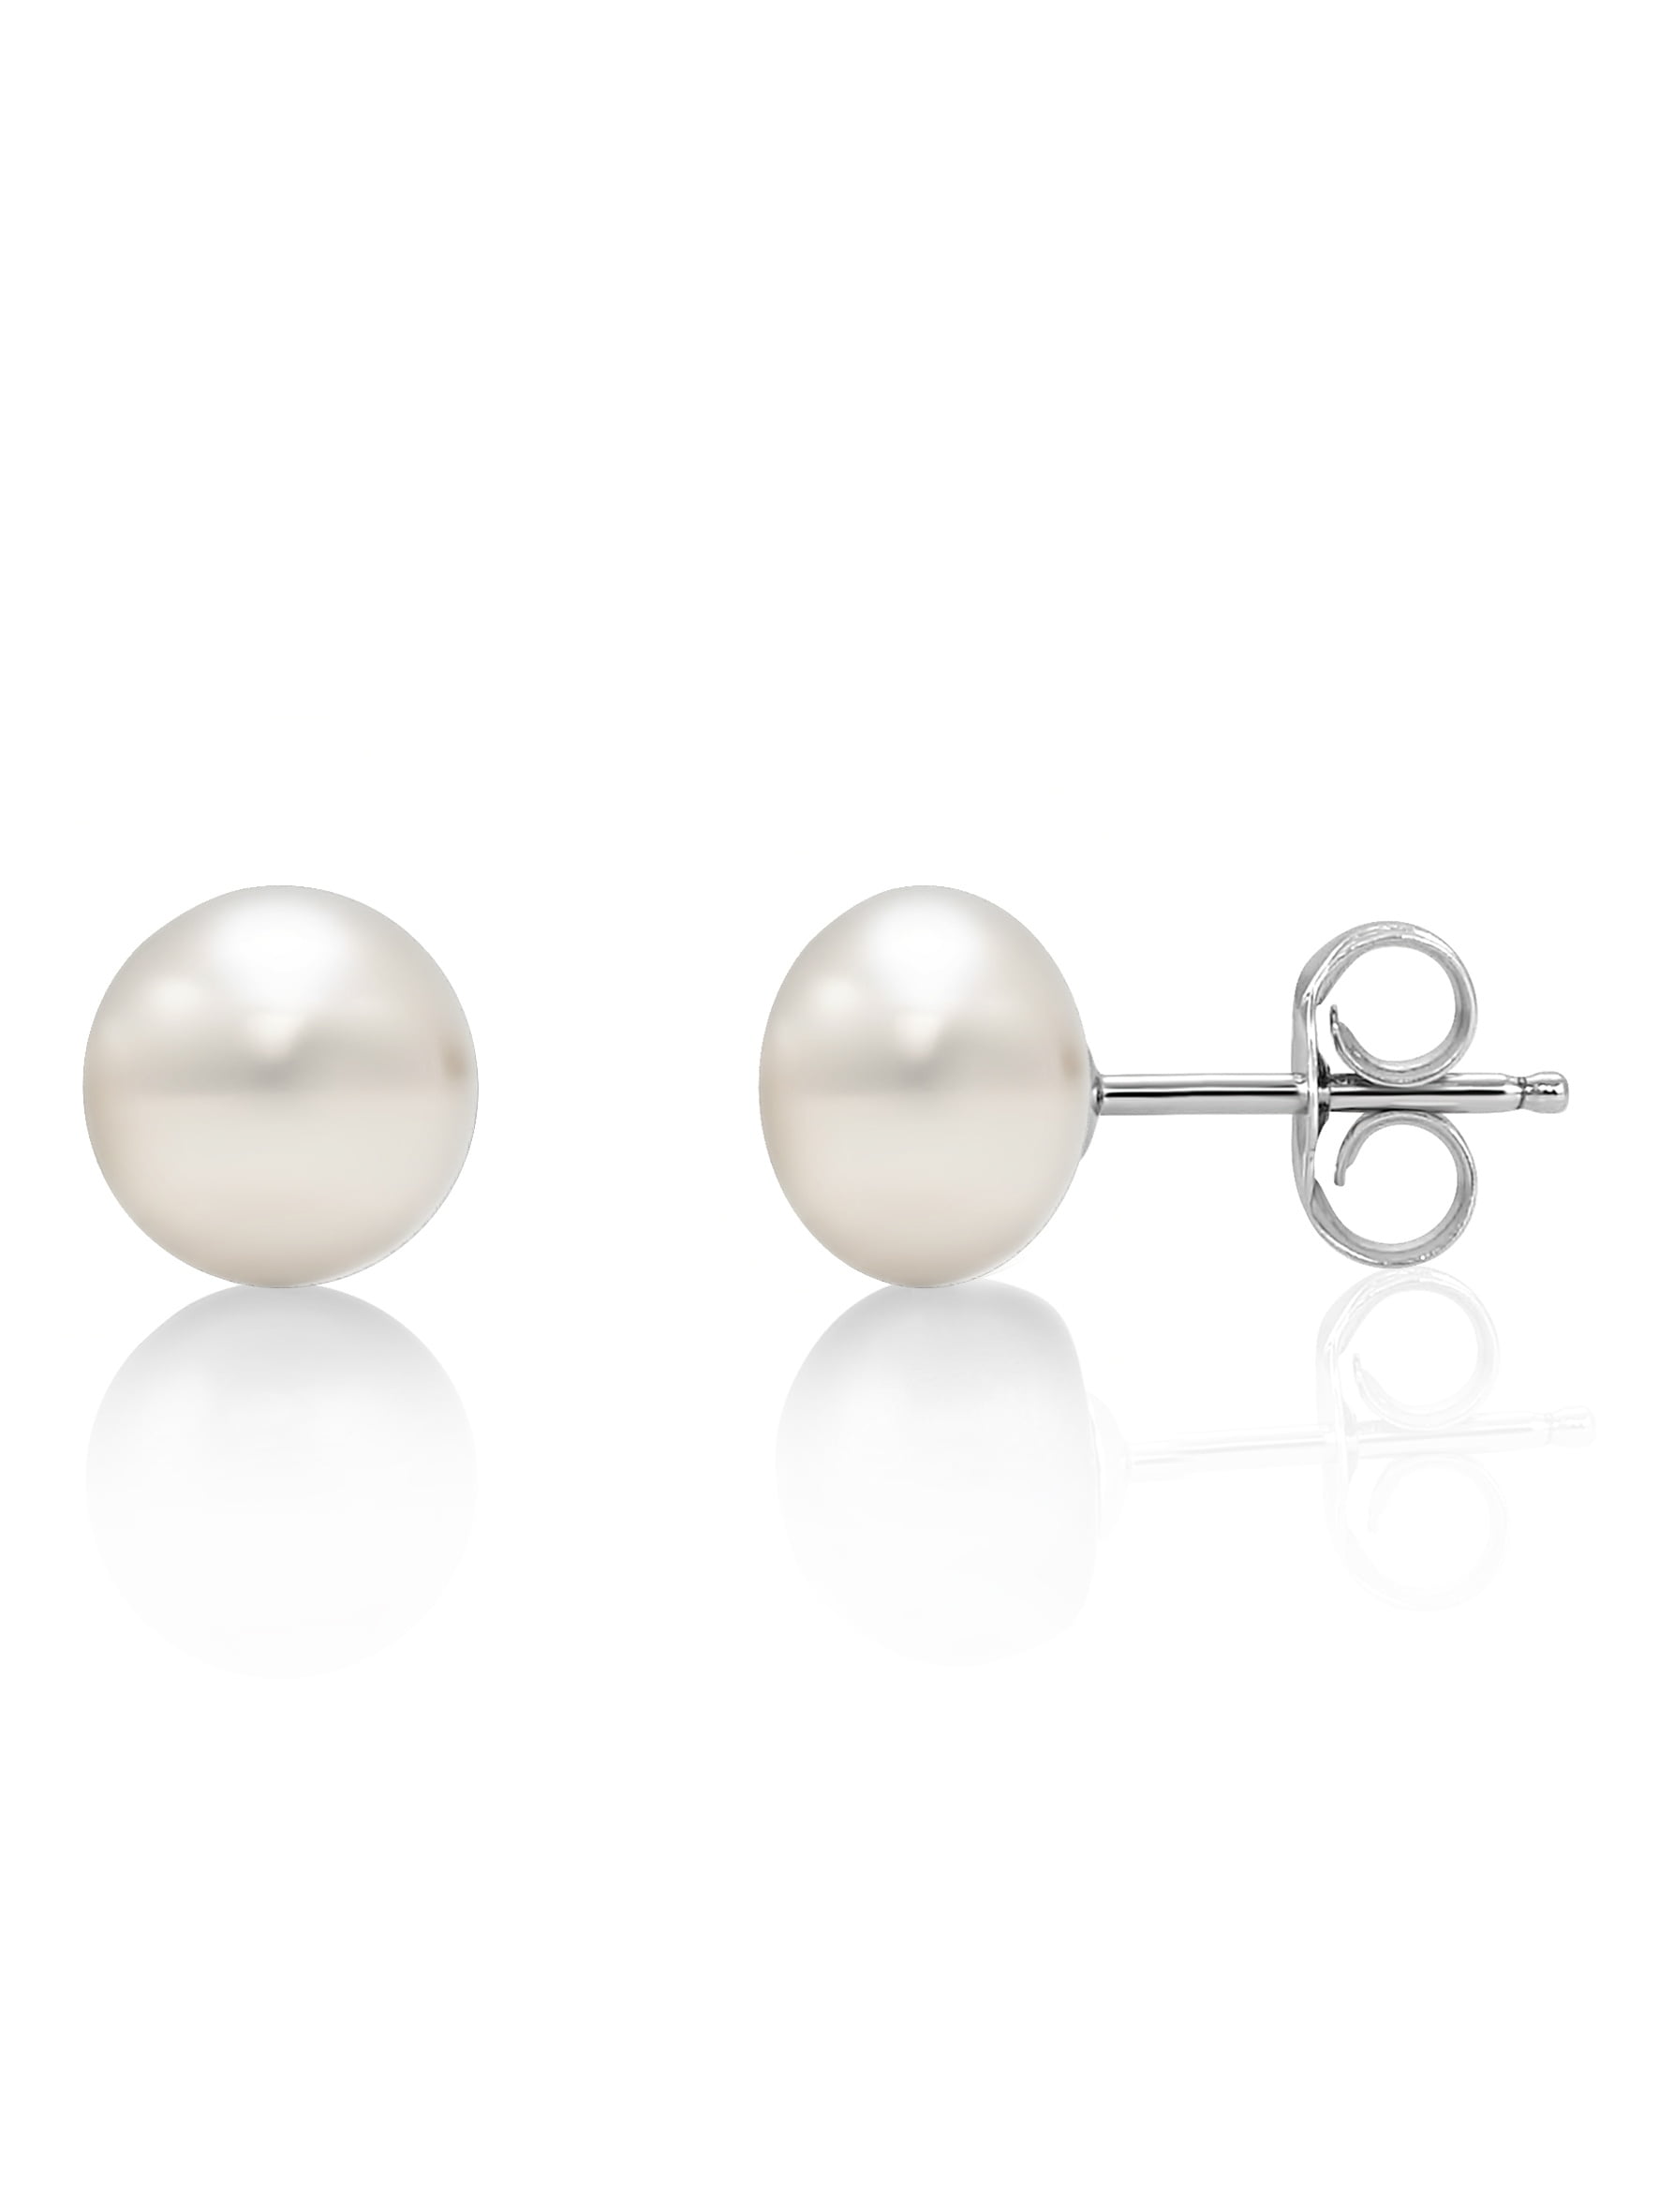 Necklace and Earrings White 5-6mm AAA Quality Freshwater Cultured Pearl Set for Women 